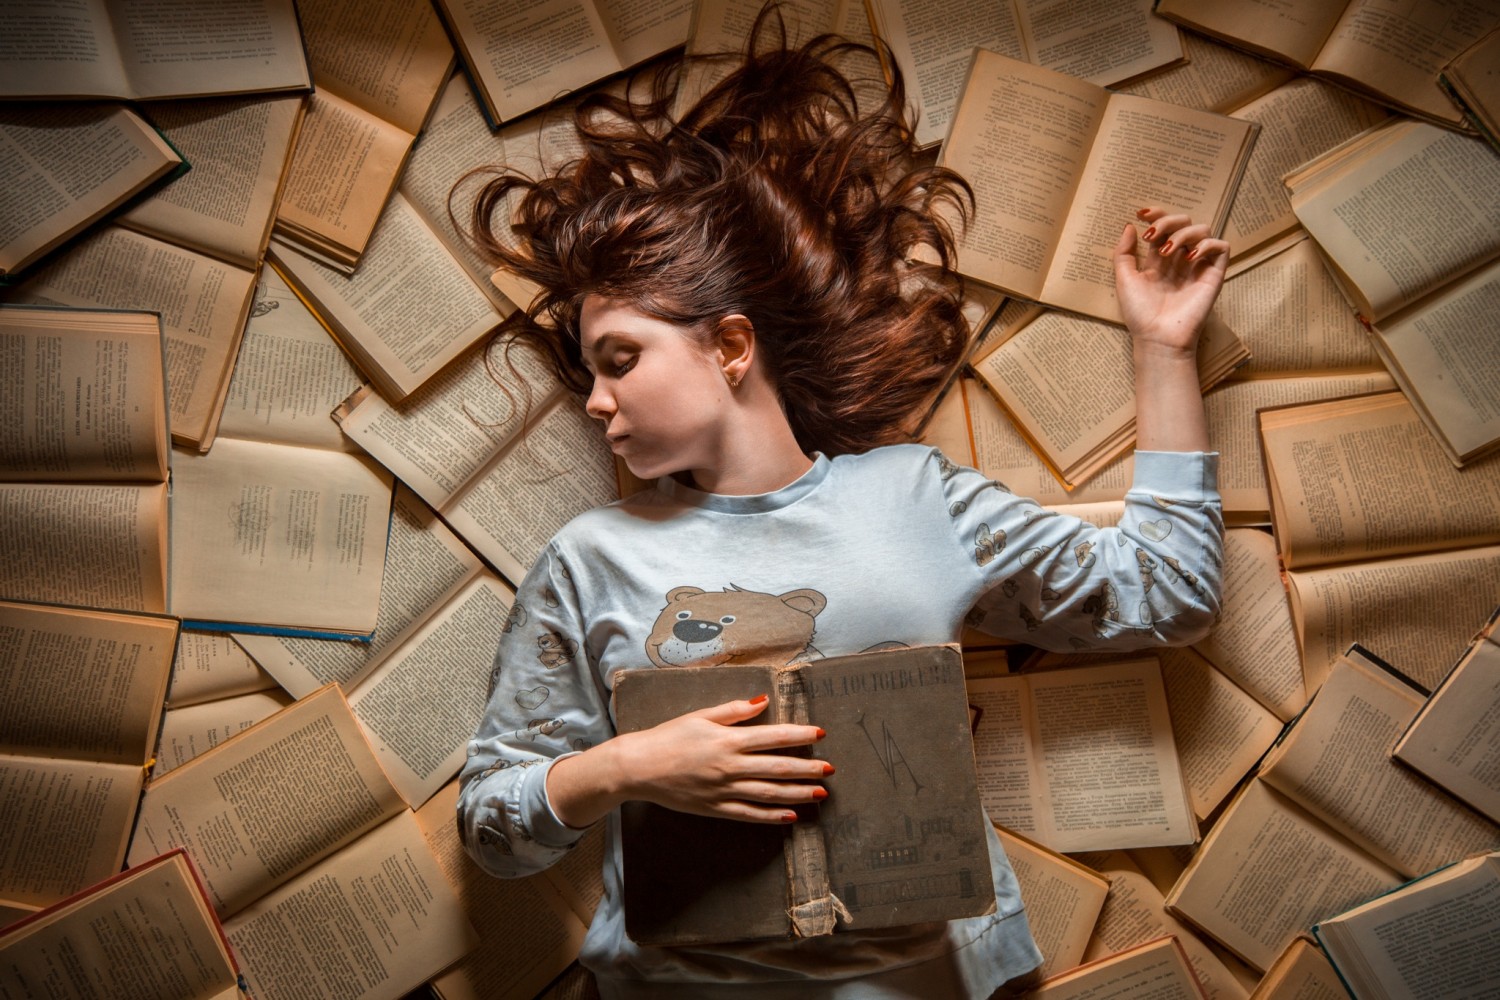 An Ode to Books: 44 Photos that Will Feed a Book Lover's Soul